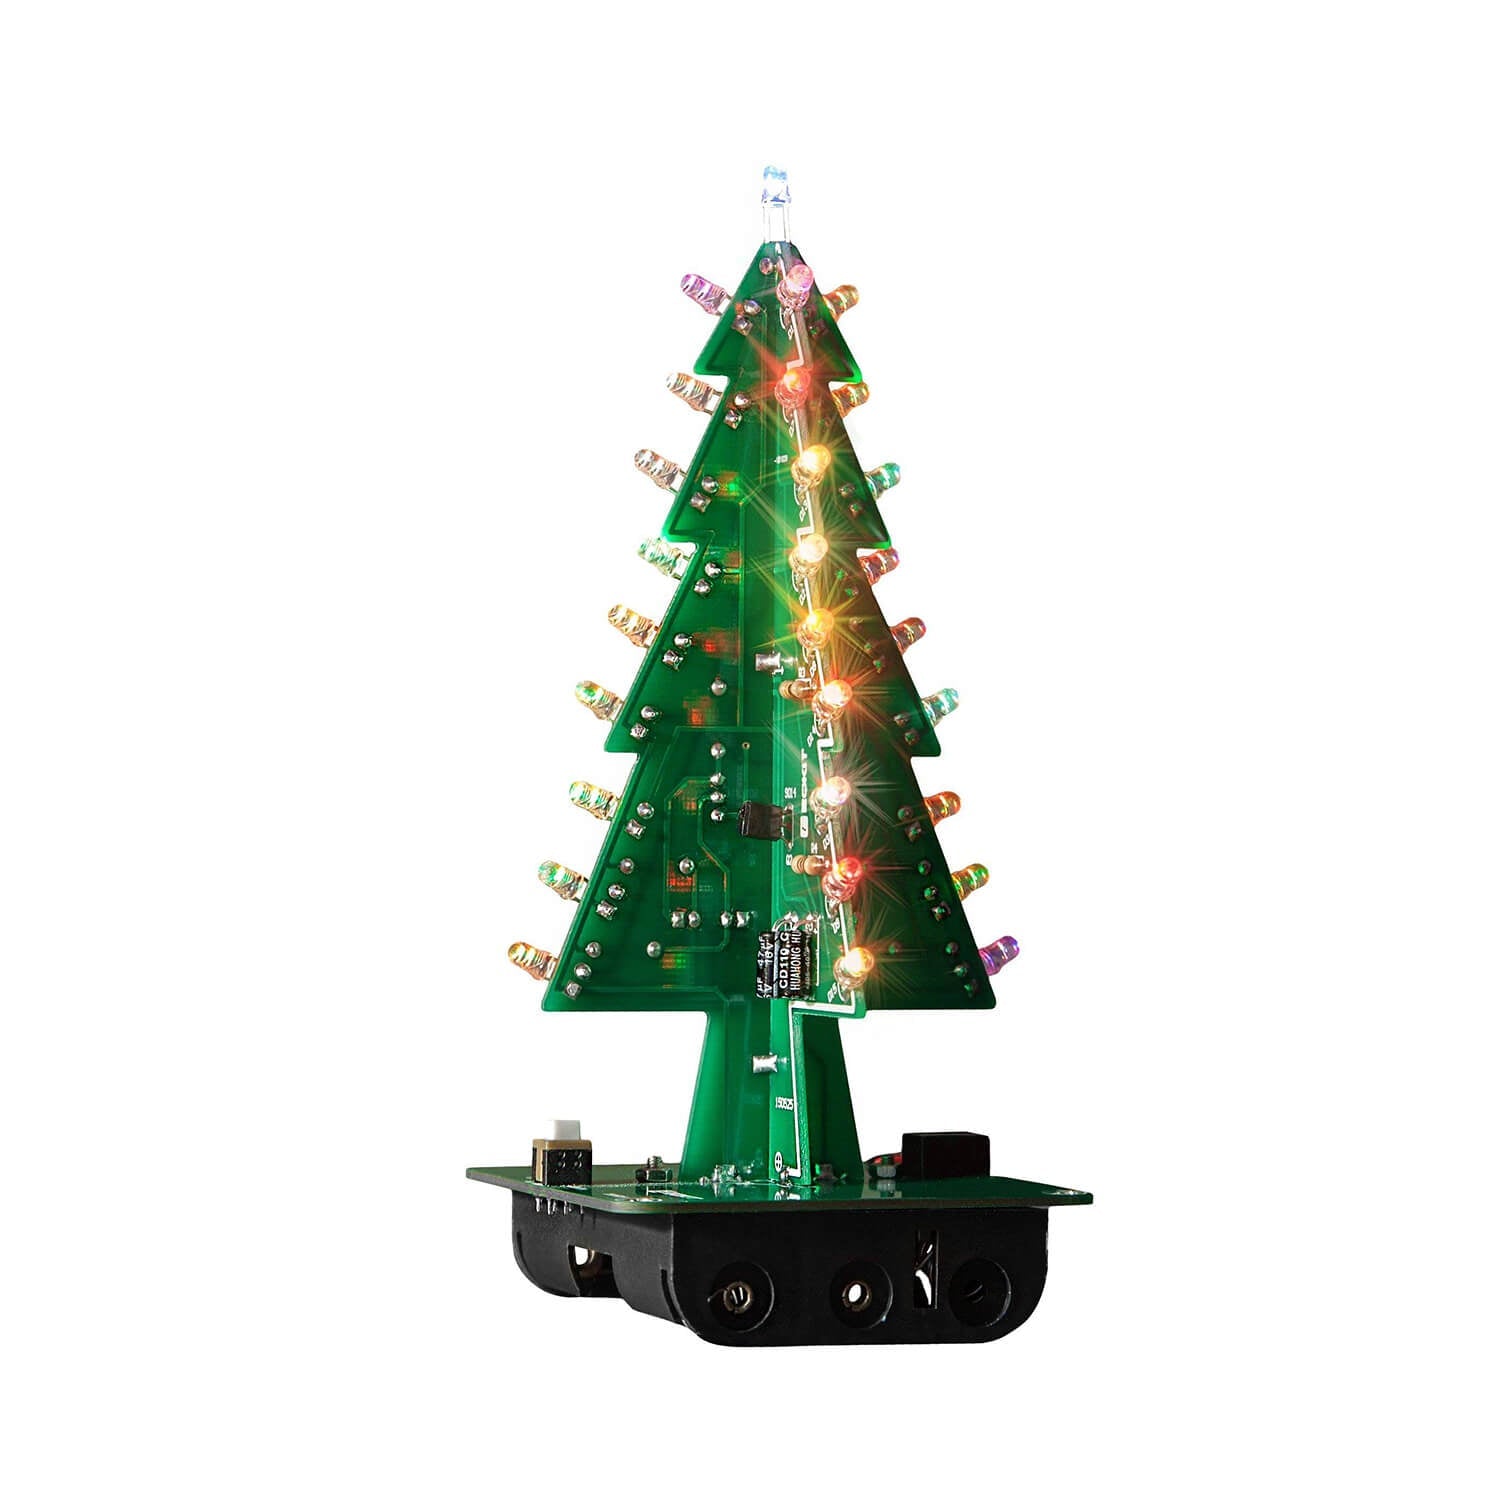 DIY LED Christmas tree kit for soldering with colorful flashing lights